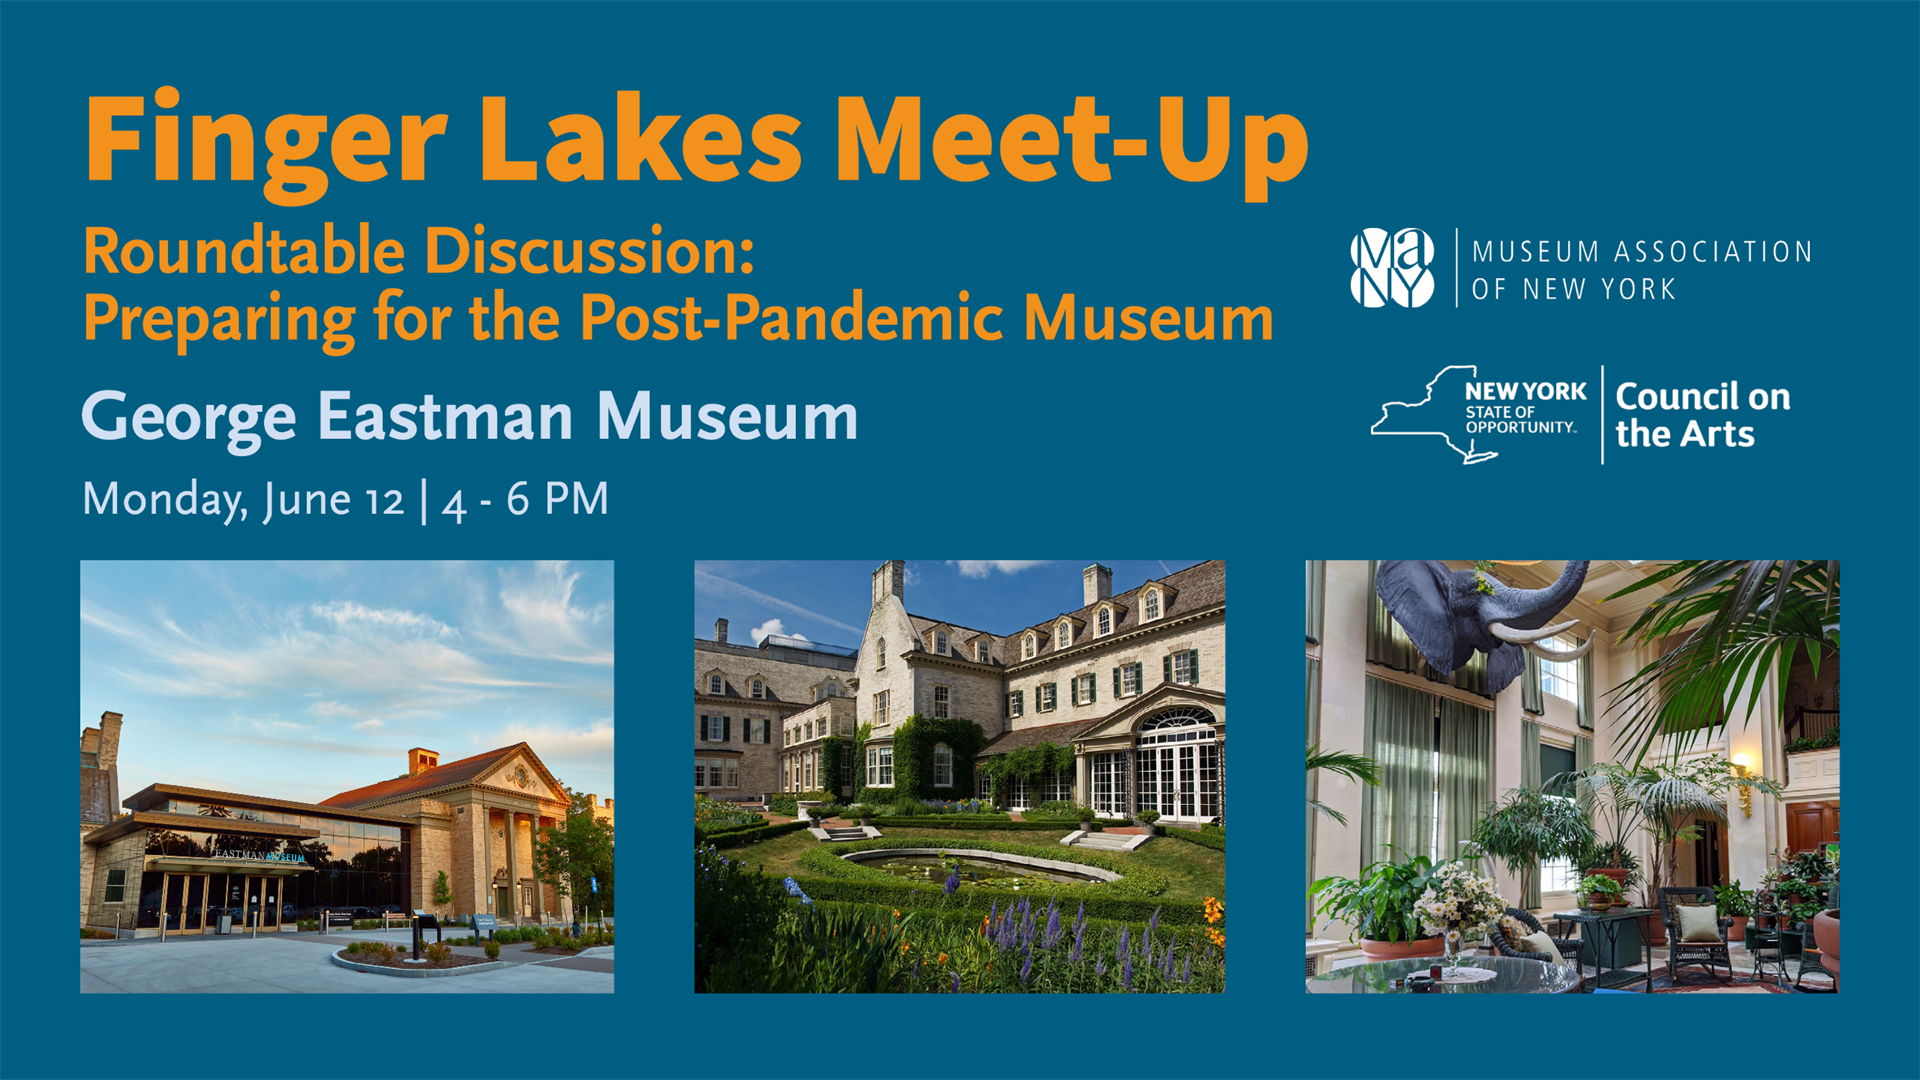 Finger Lakes Meet-Up and Roundtable Discussion at the George Eastman Museum on June 12 from 4 to 6 PM